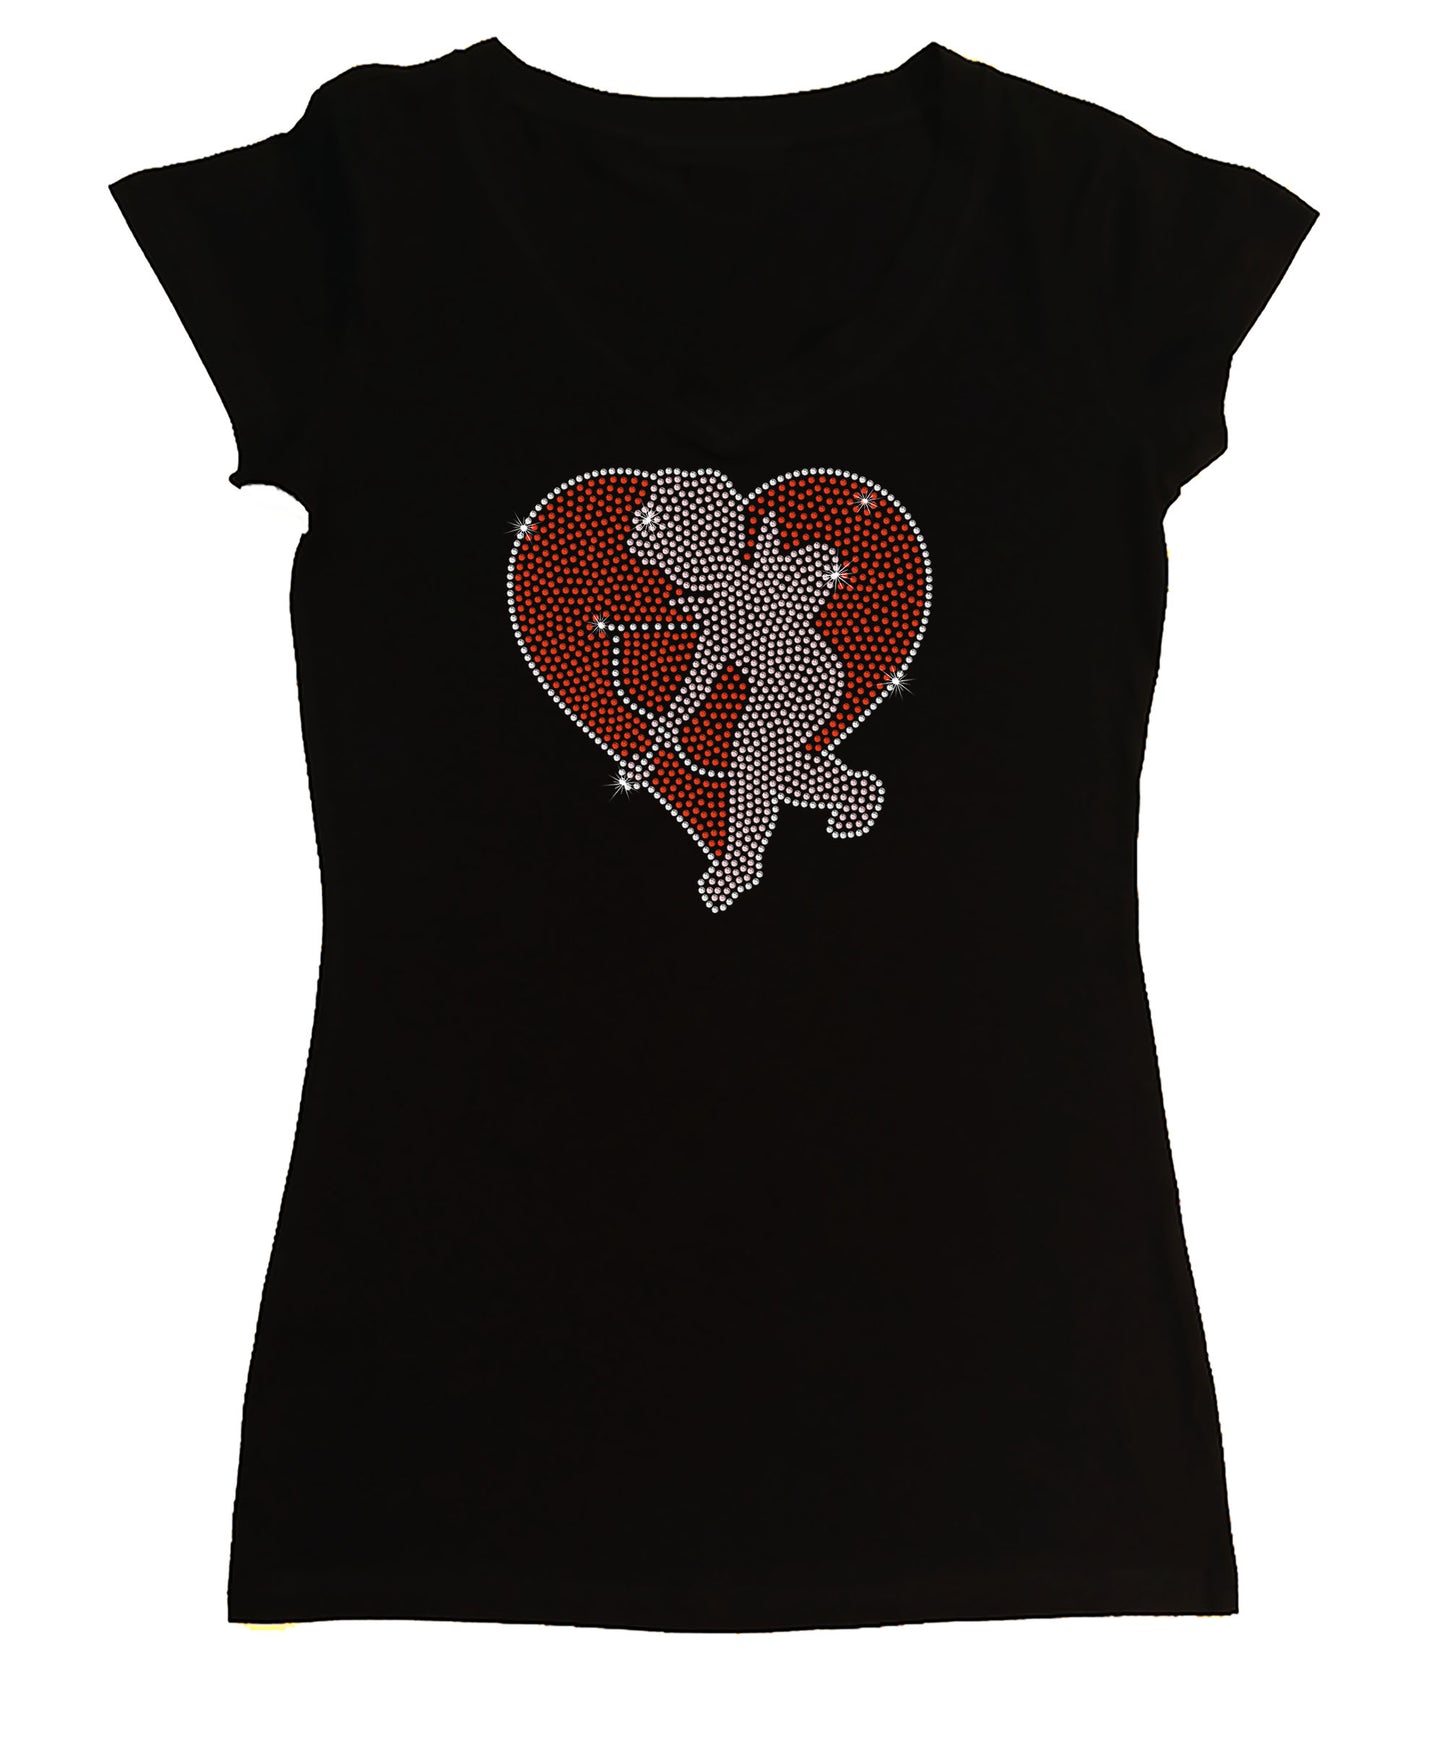 Women's Rhinestone Fitted Tight Snug Shirt Red Heart with Cupid and His Bow and Arrow - Valentines Shirt